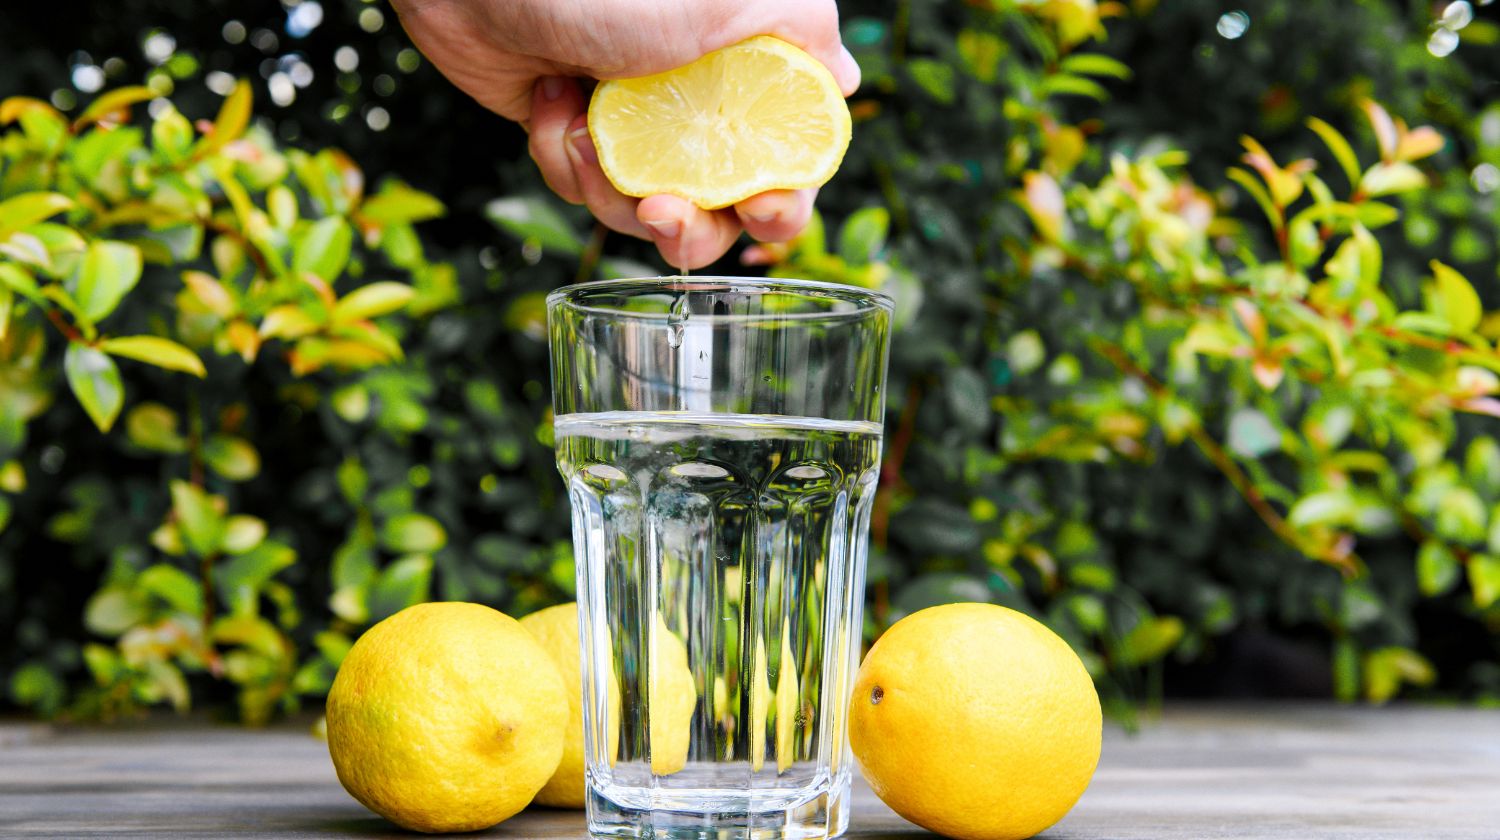 is lemon water good for weight loss